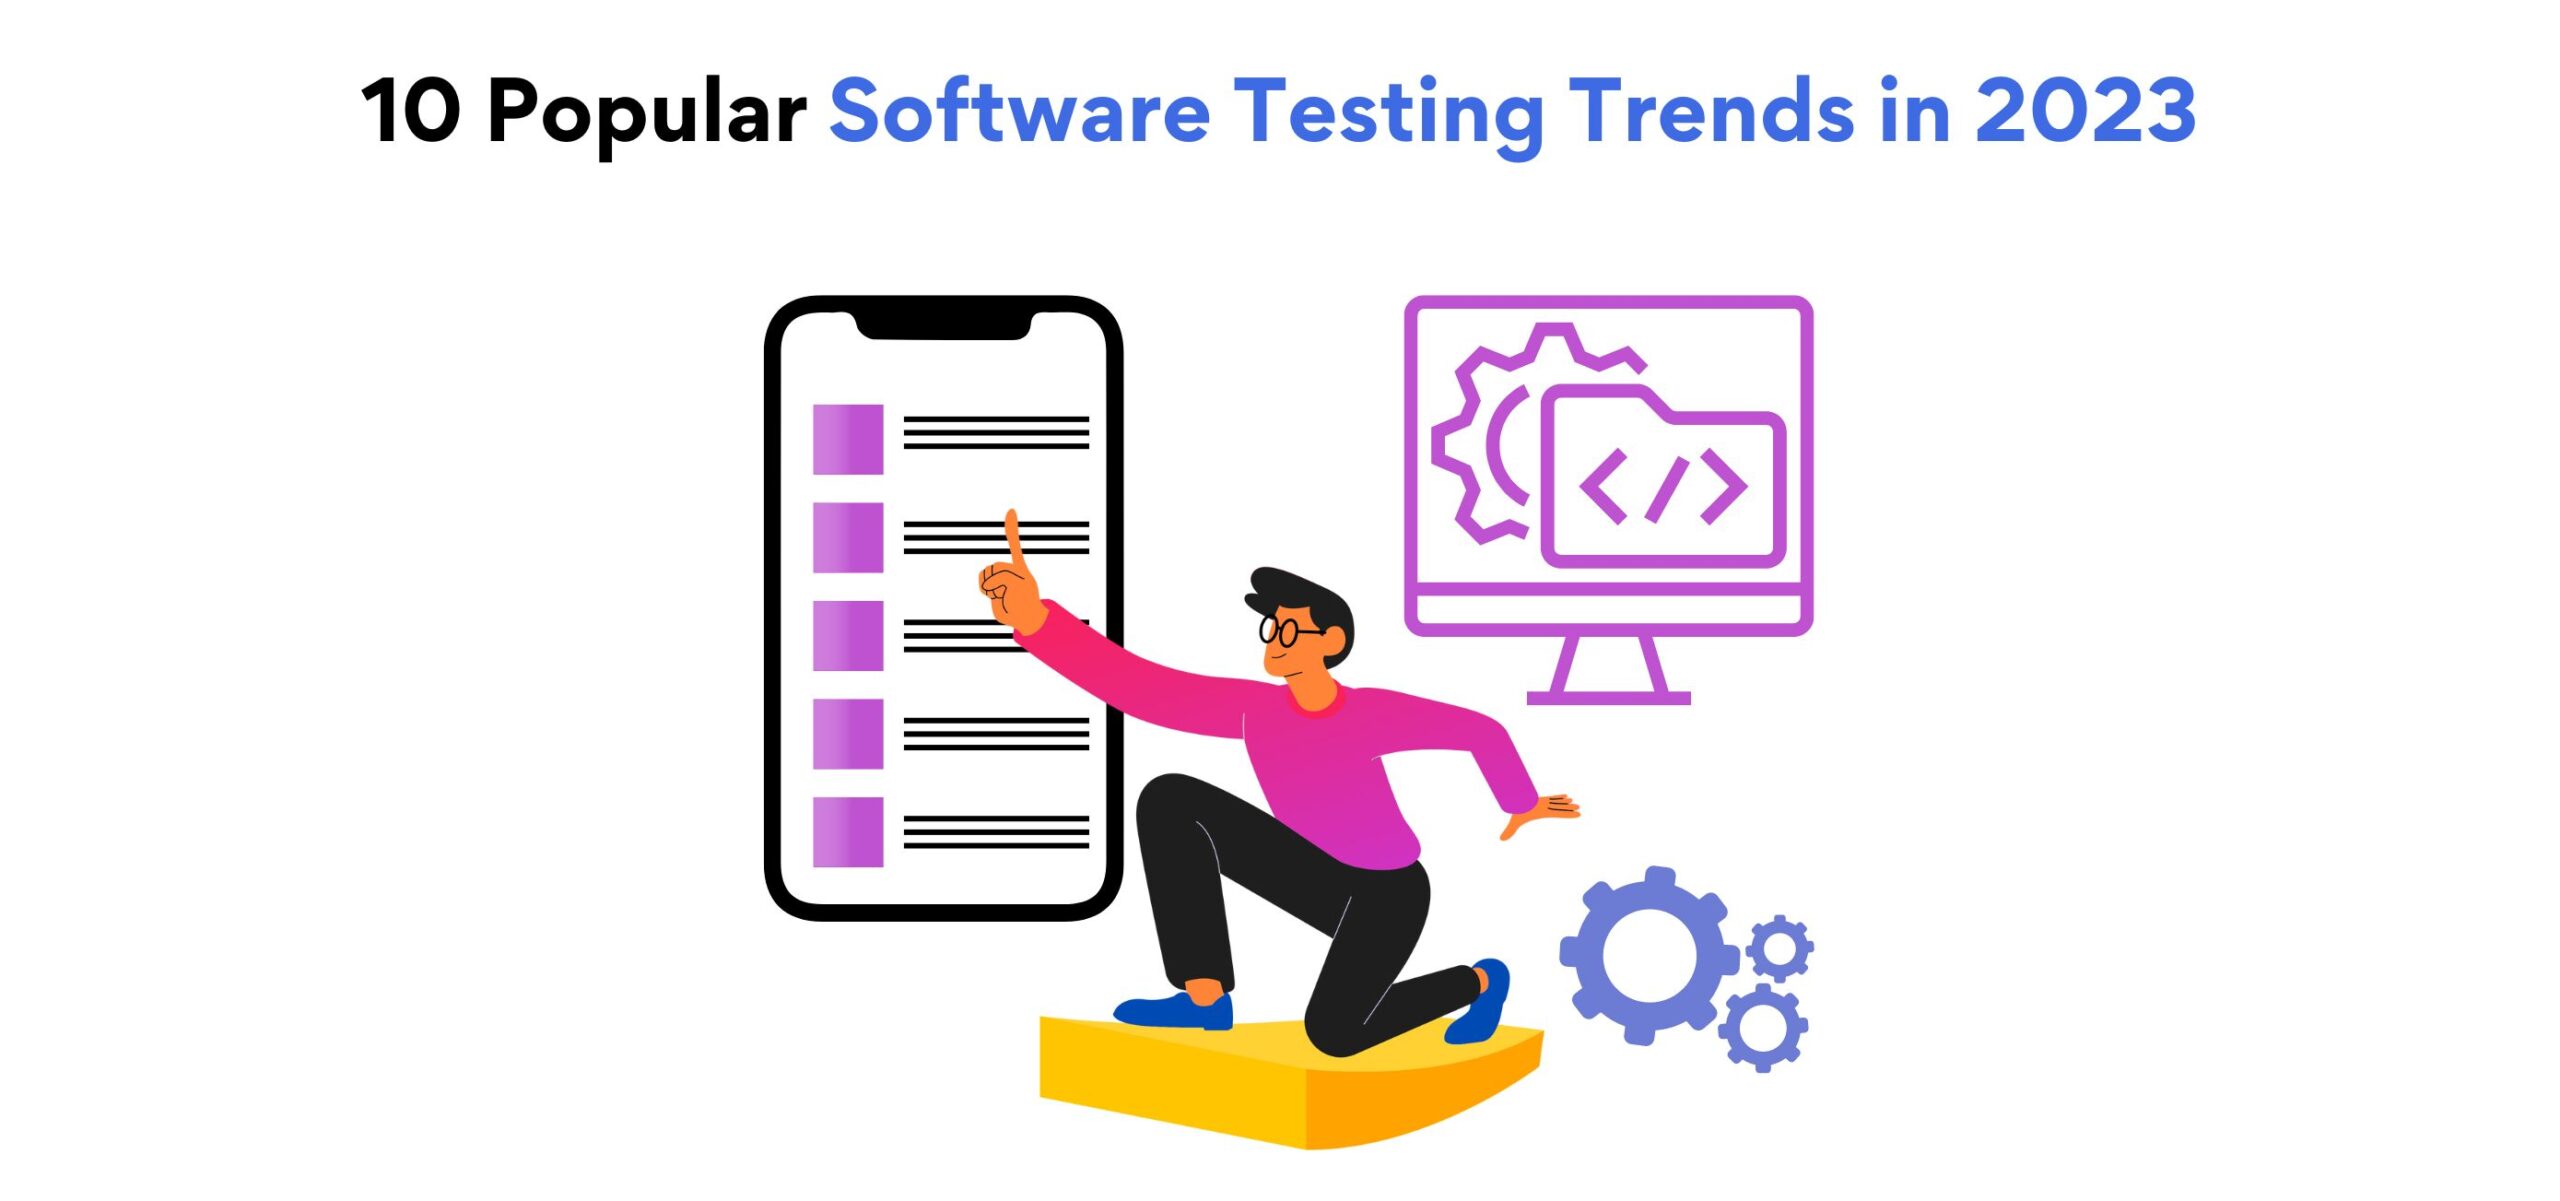 10 Popular Software Testing Trends in 2023